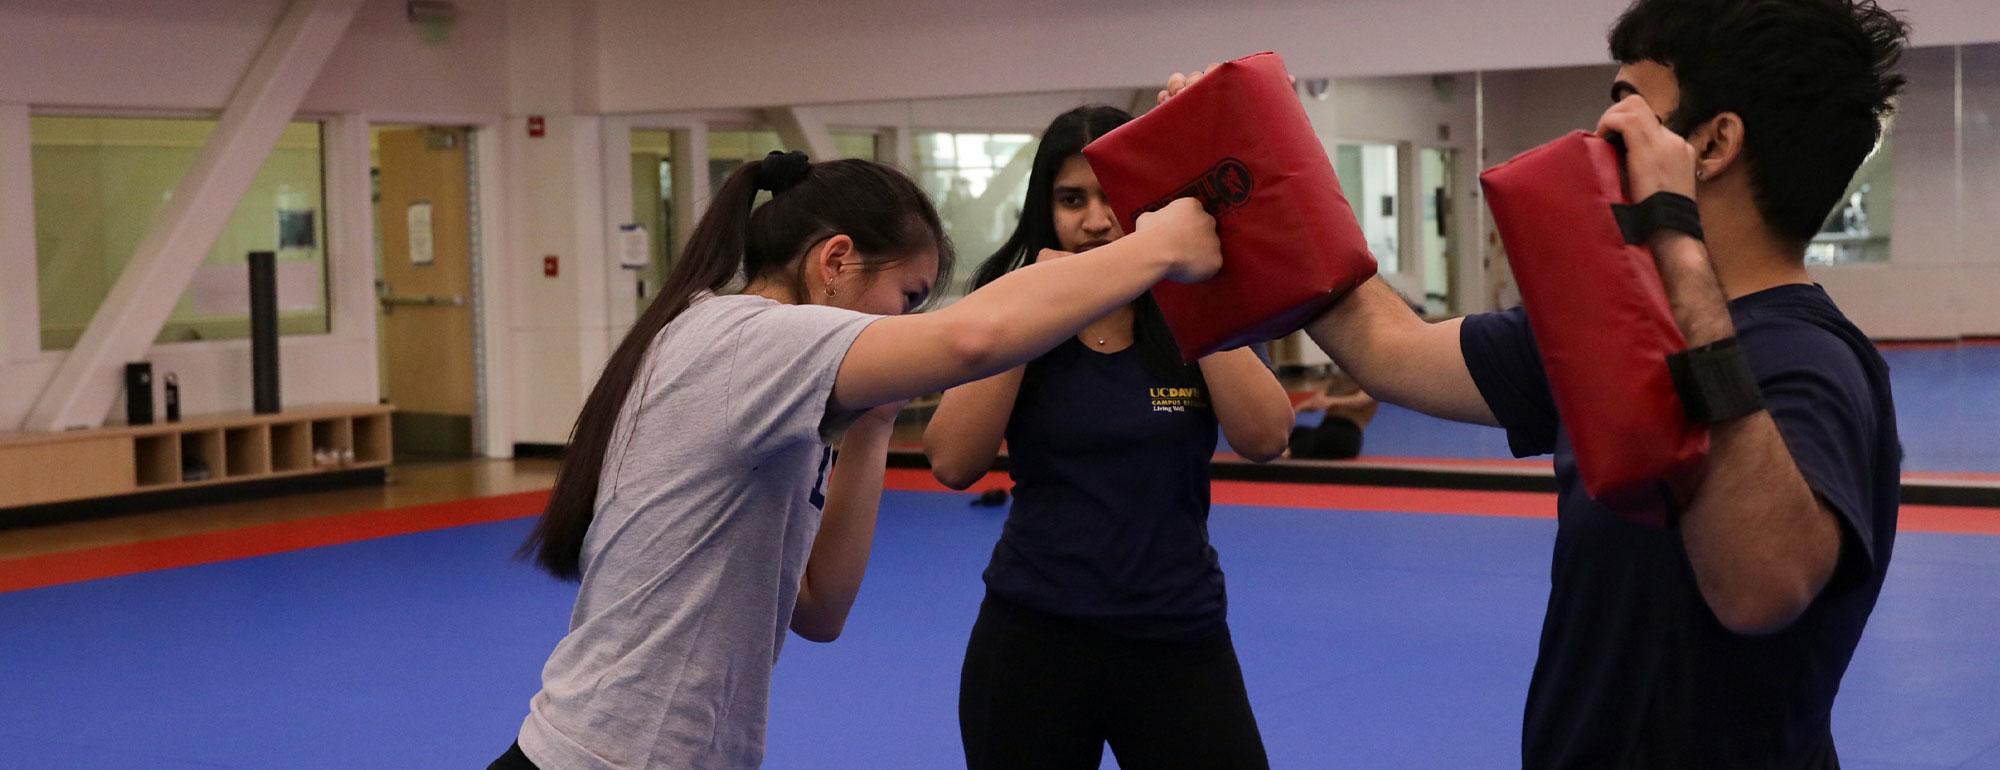 A trainer shows a student how to punch a pad, which a third student holds up for practice. 